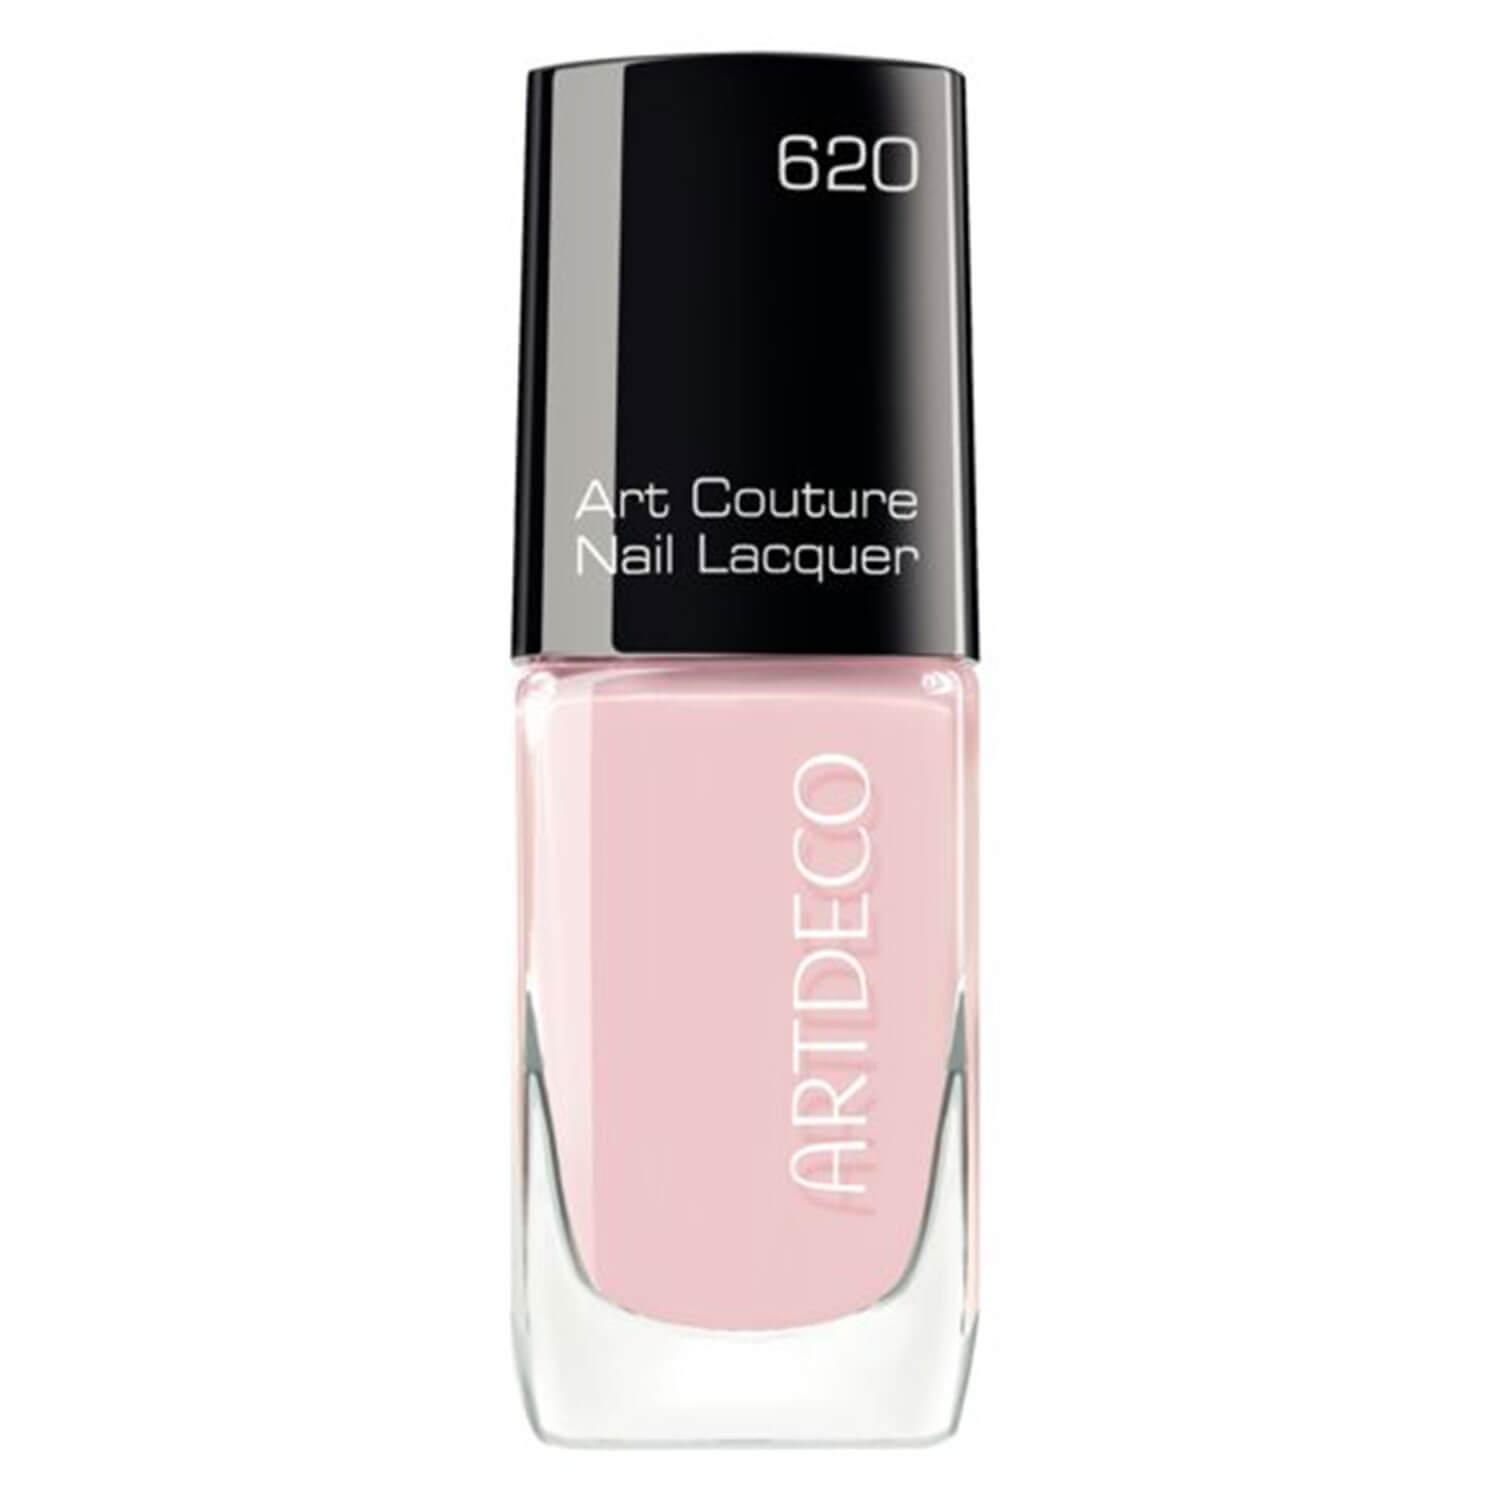 Art Couture - Nail Lacquer Sheer Rose 620